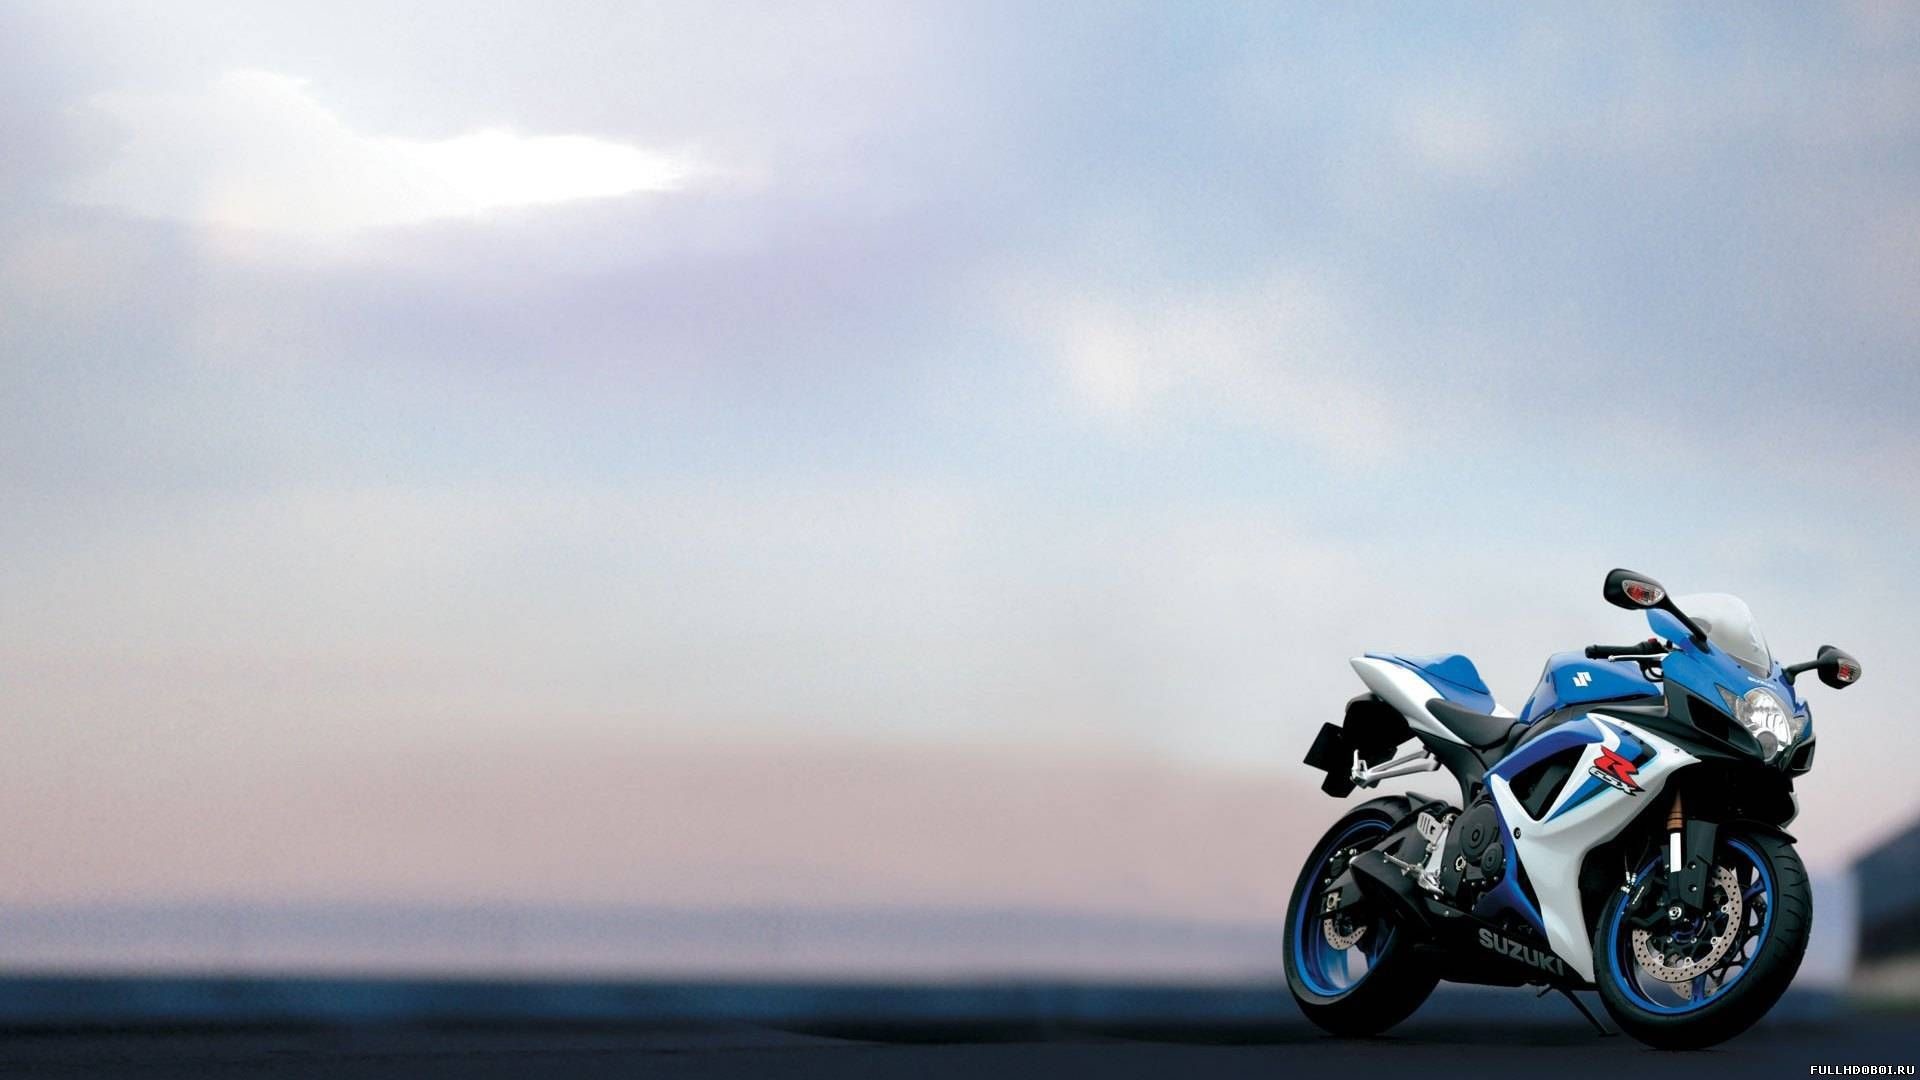 1920x1080 Beautiful bike in Moscow Suzuki GSXR wallpapers and images